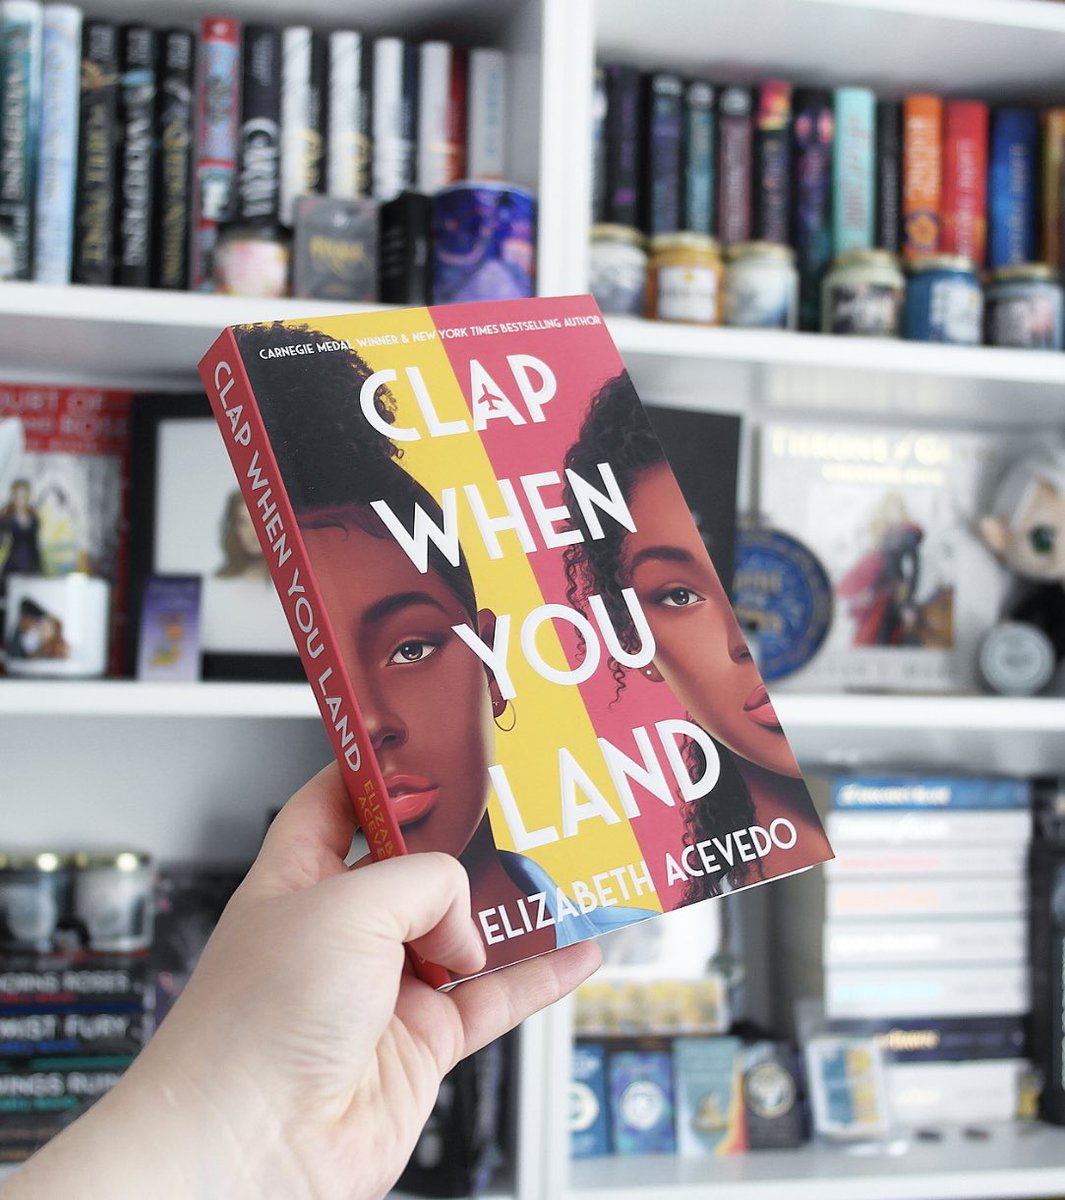 31. Clap When You Land by Elizabeth Acevedo • Very poignant and powerful • Discussions of racism and privilege• A story about family and forgiveness • Told in verse through captivating writing • CW: grief, death, sexual harassment • 5/5 stars